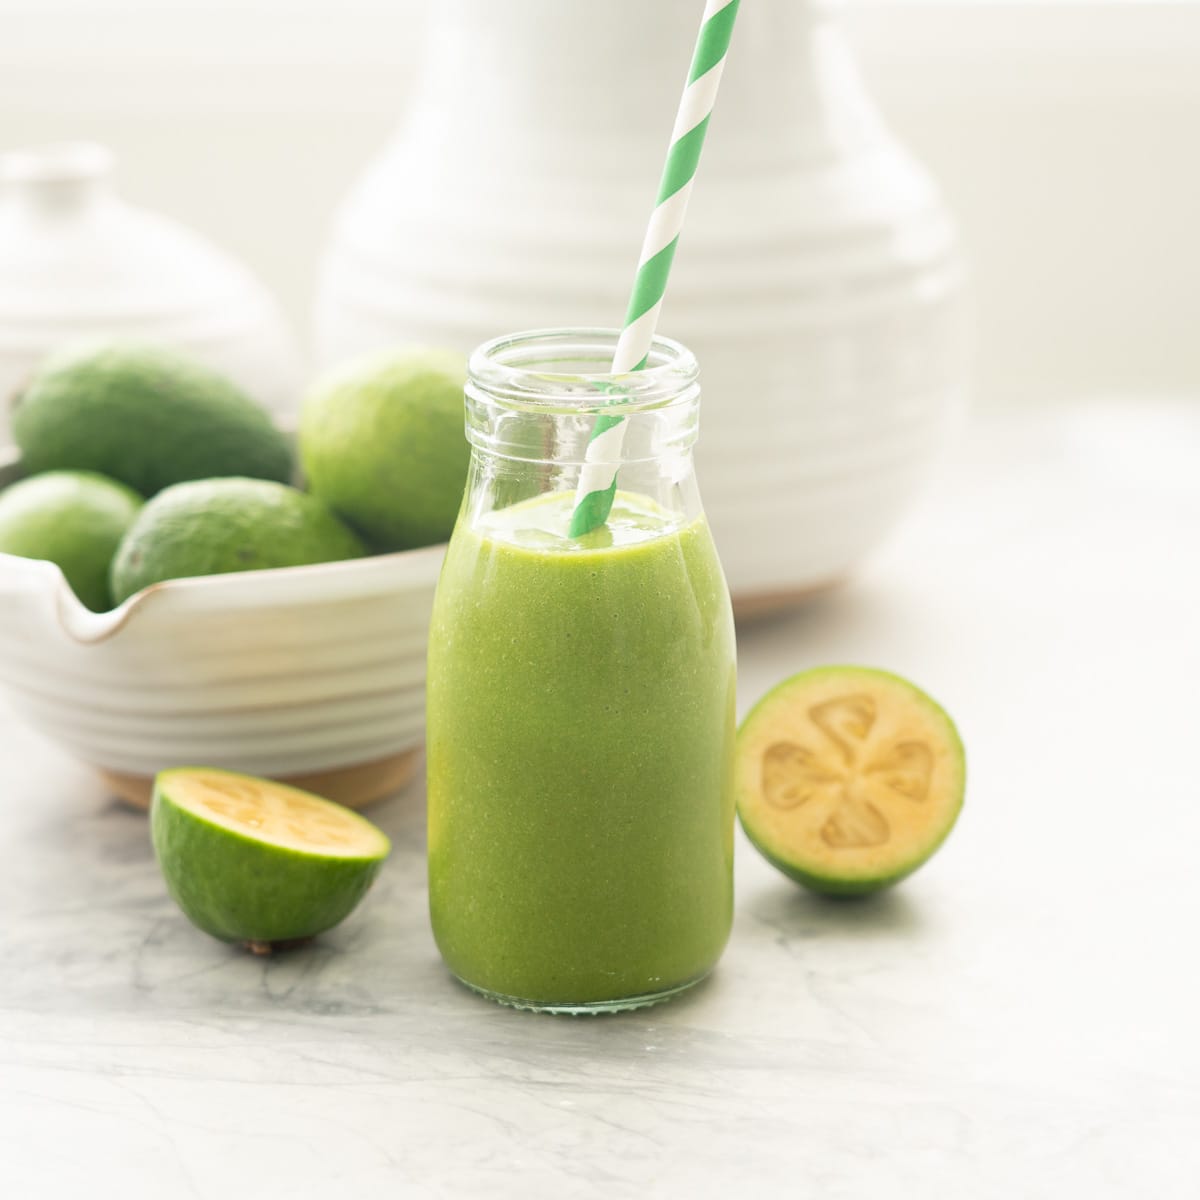 A small glass bottle of green smoothie with a green and white striped straw, a bowl of feijoas in the background. 